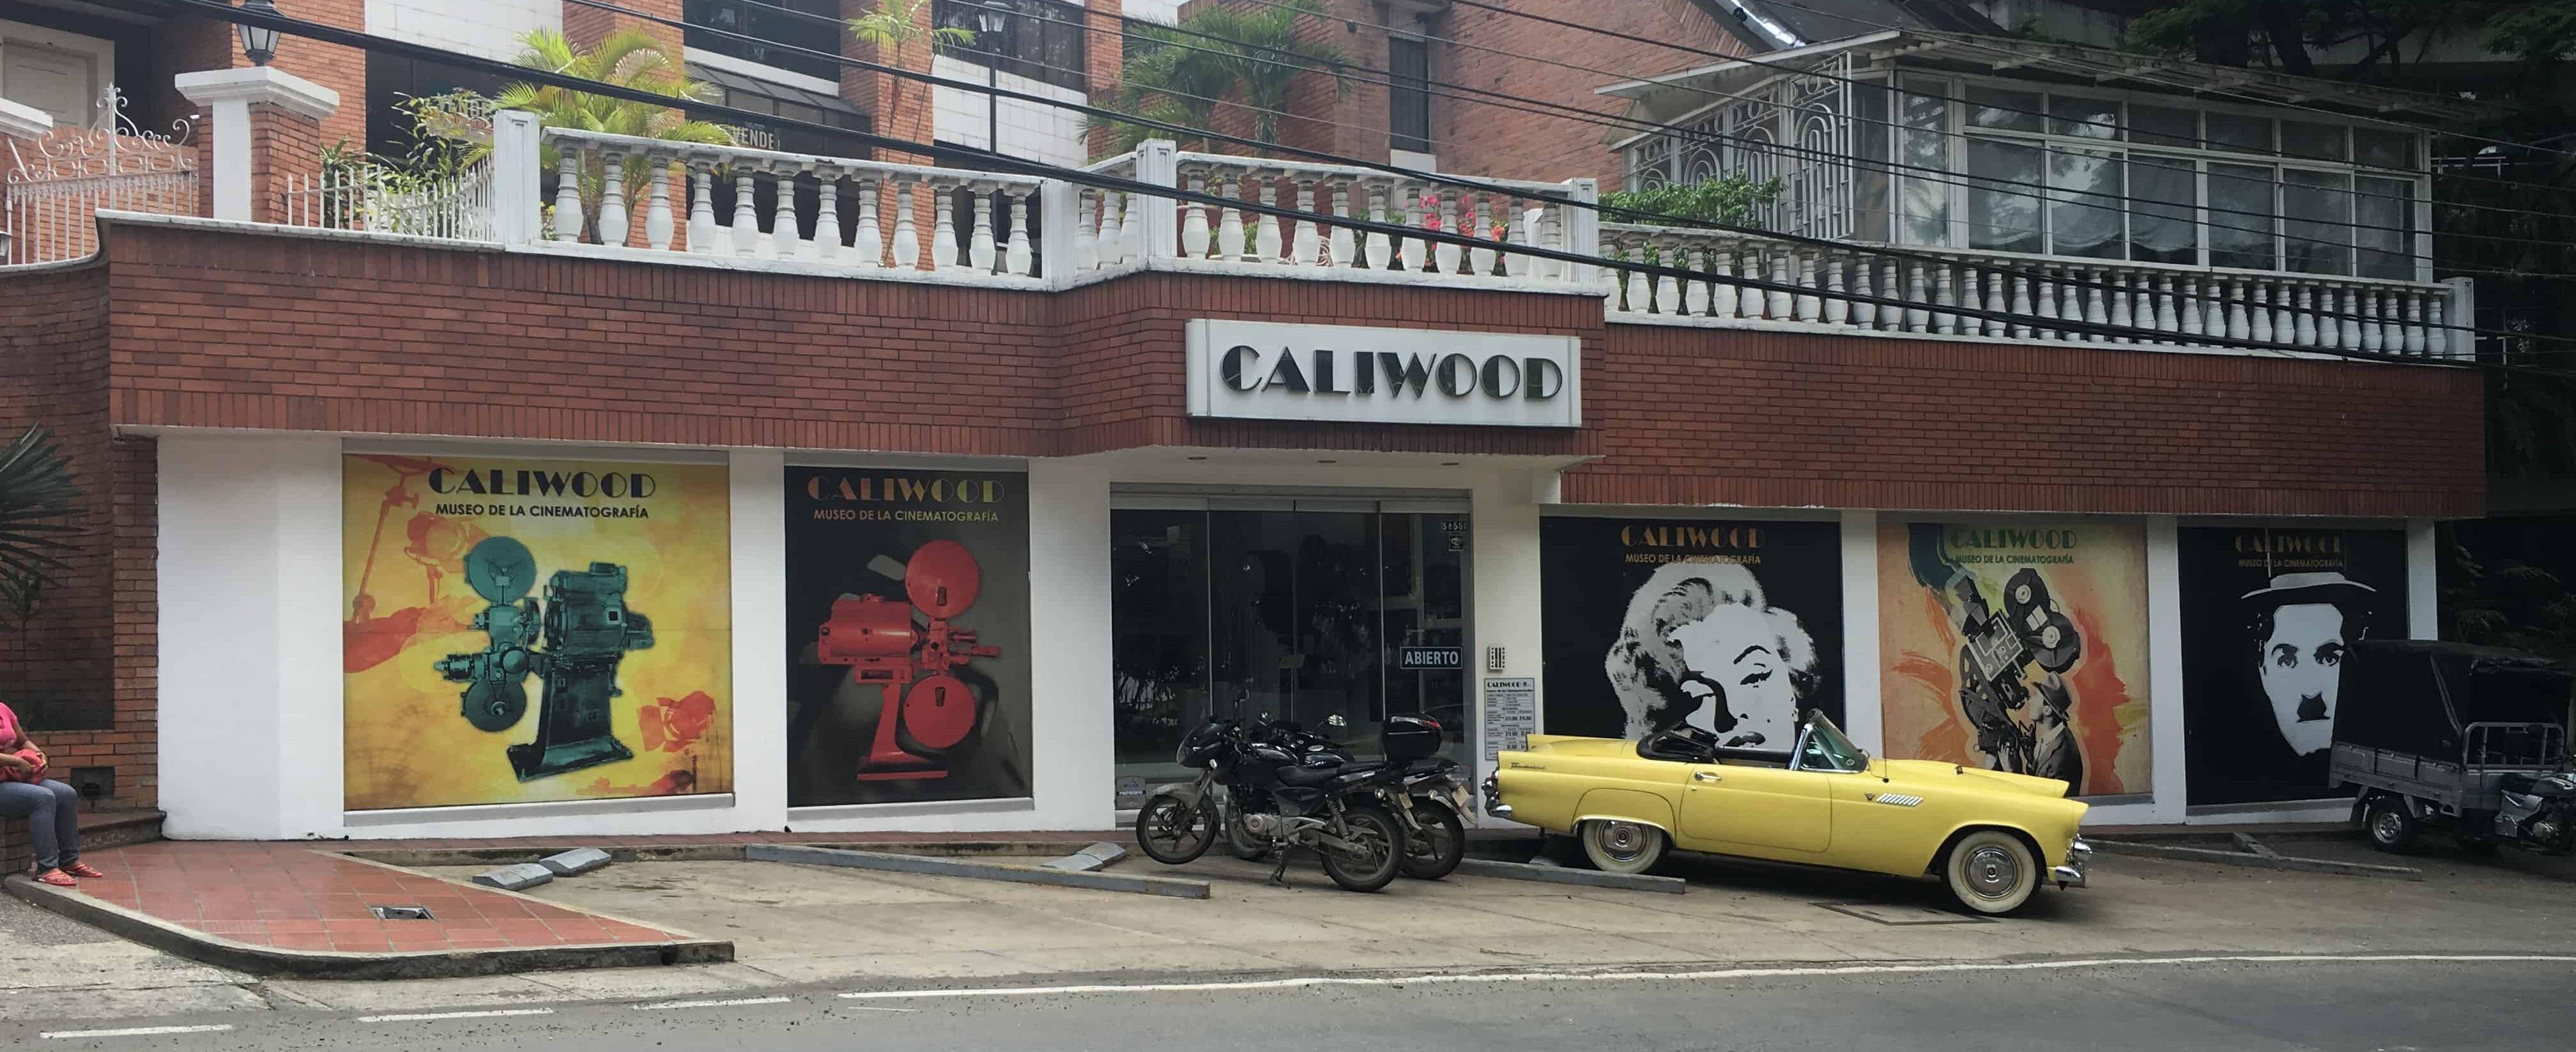 Caliwood in Cali, Colombia